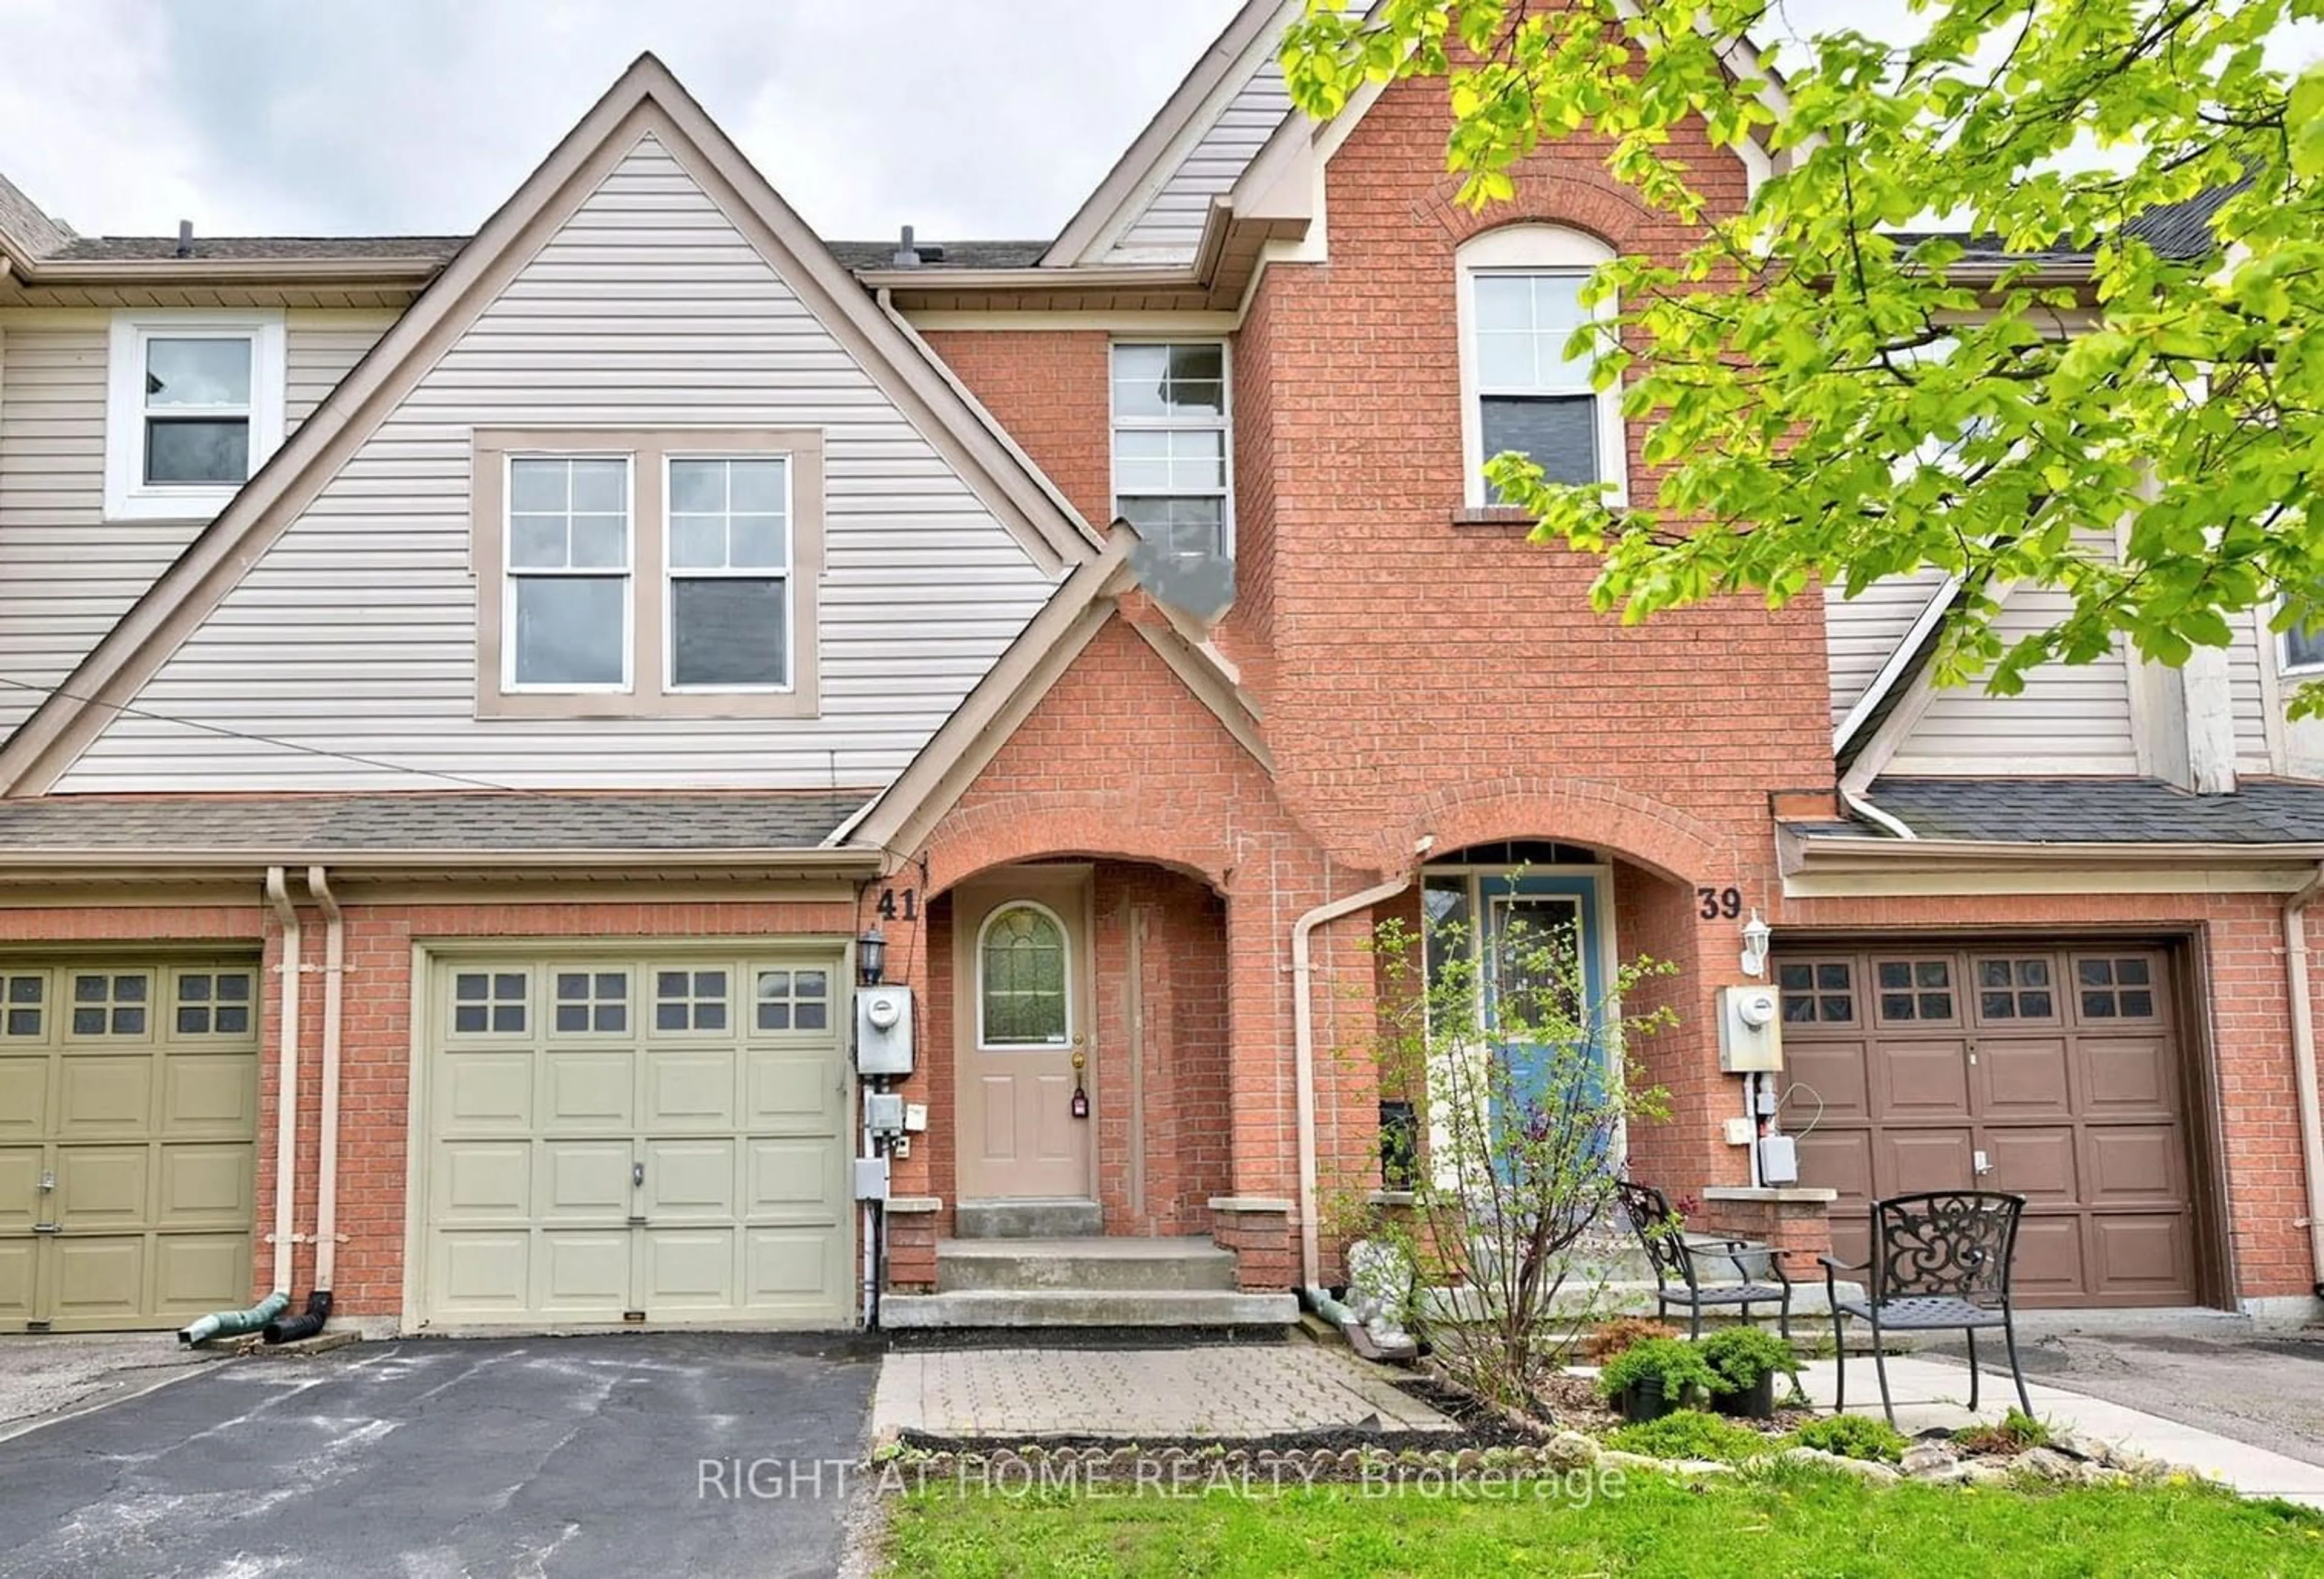 Home with brick exterior material for 41 Evelyn Buck Lane, Aurora Ontario L4G 7J4